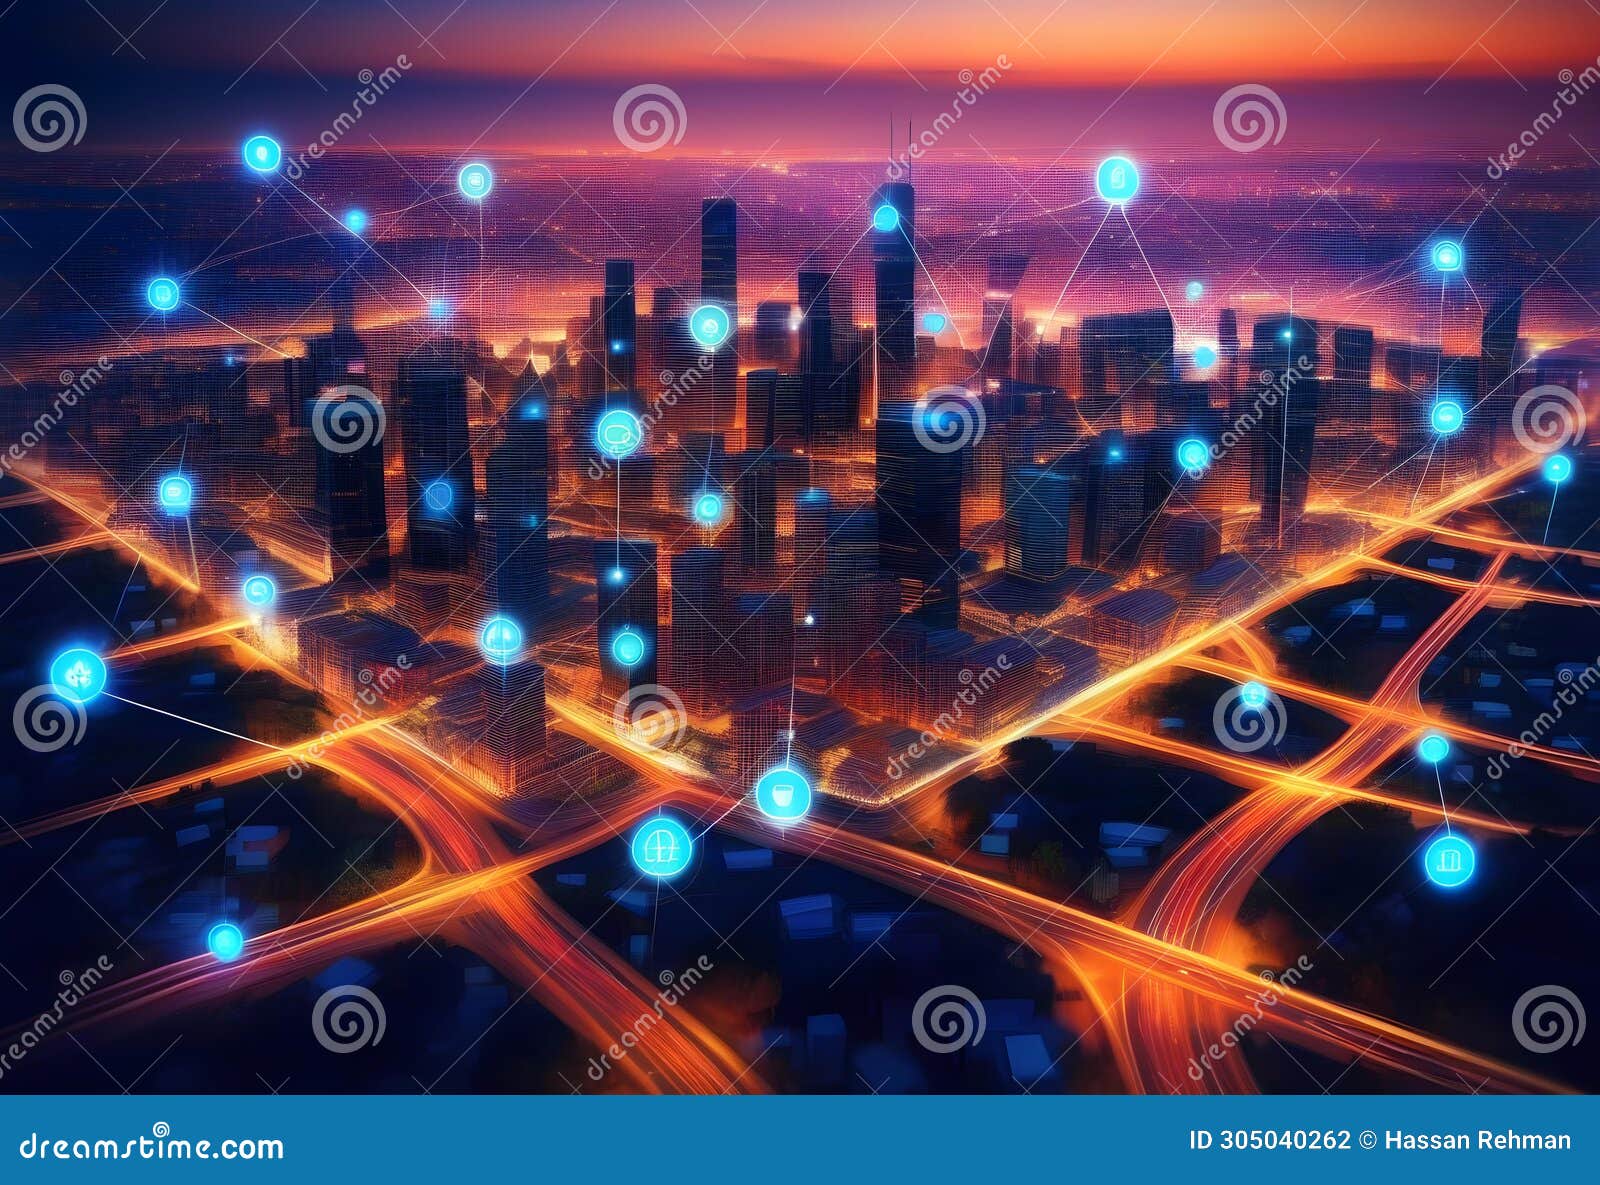 smart digital city with connection network reciprocity over the cityscape